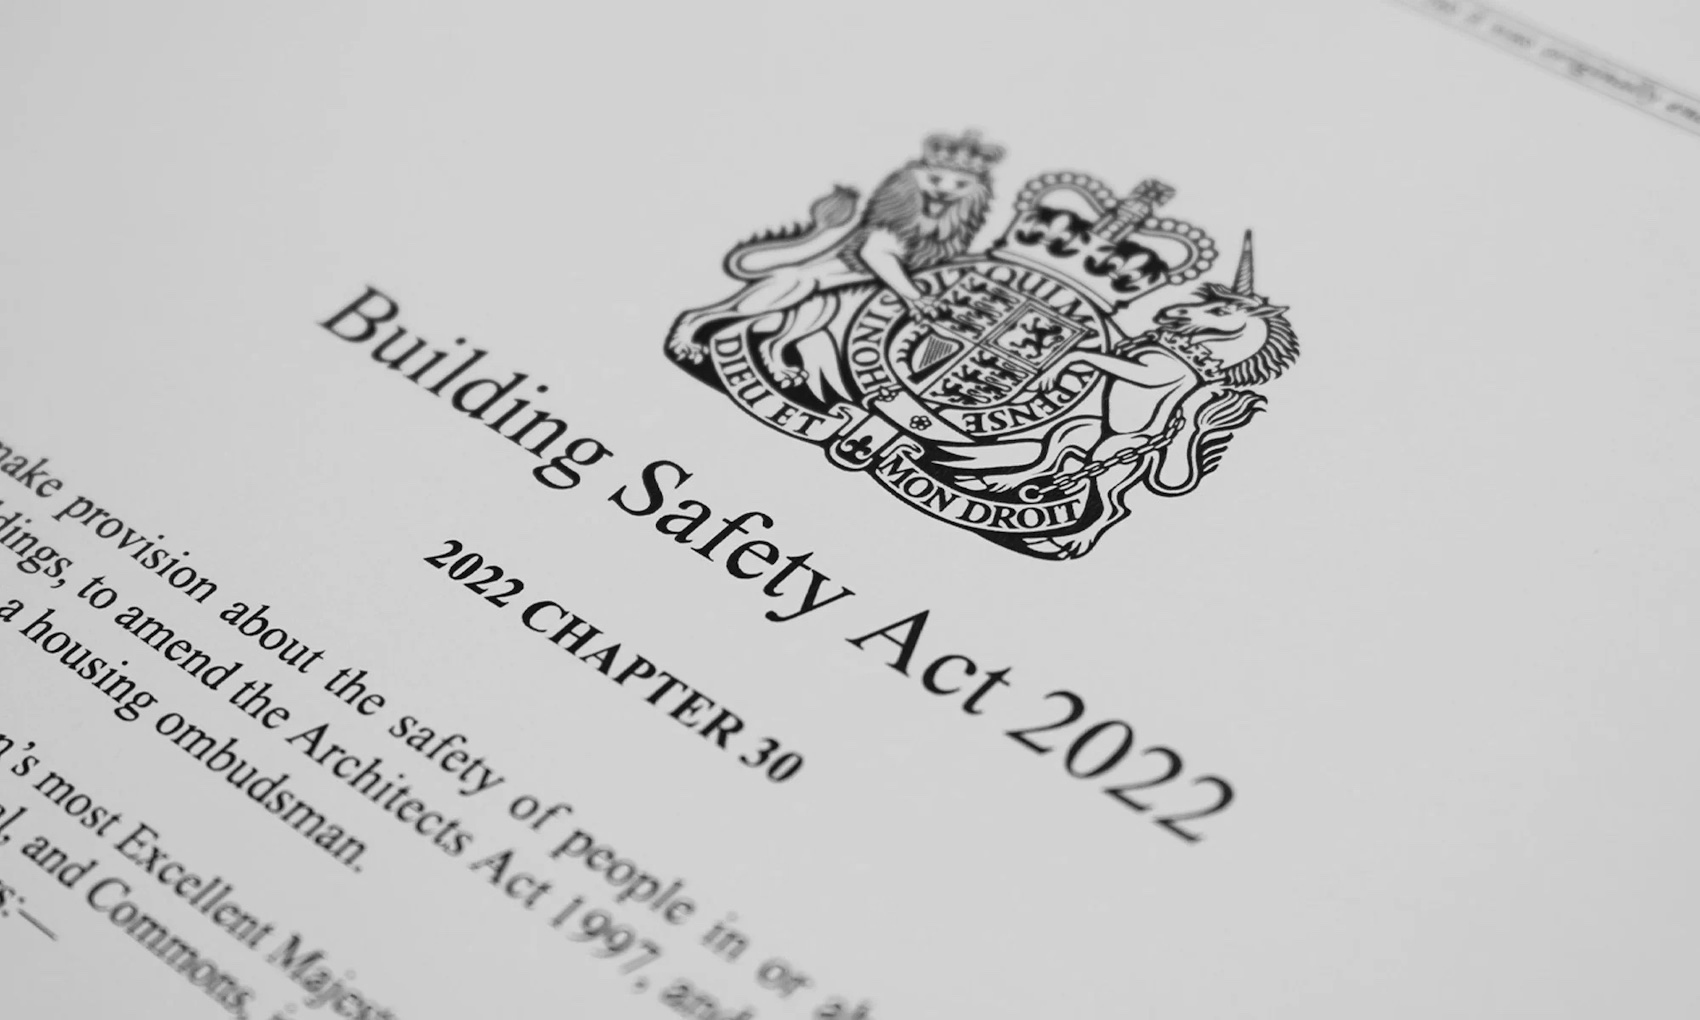 The Building Safety Act